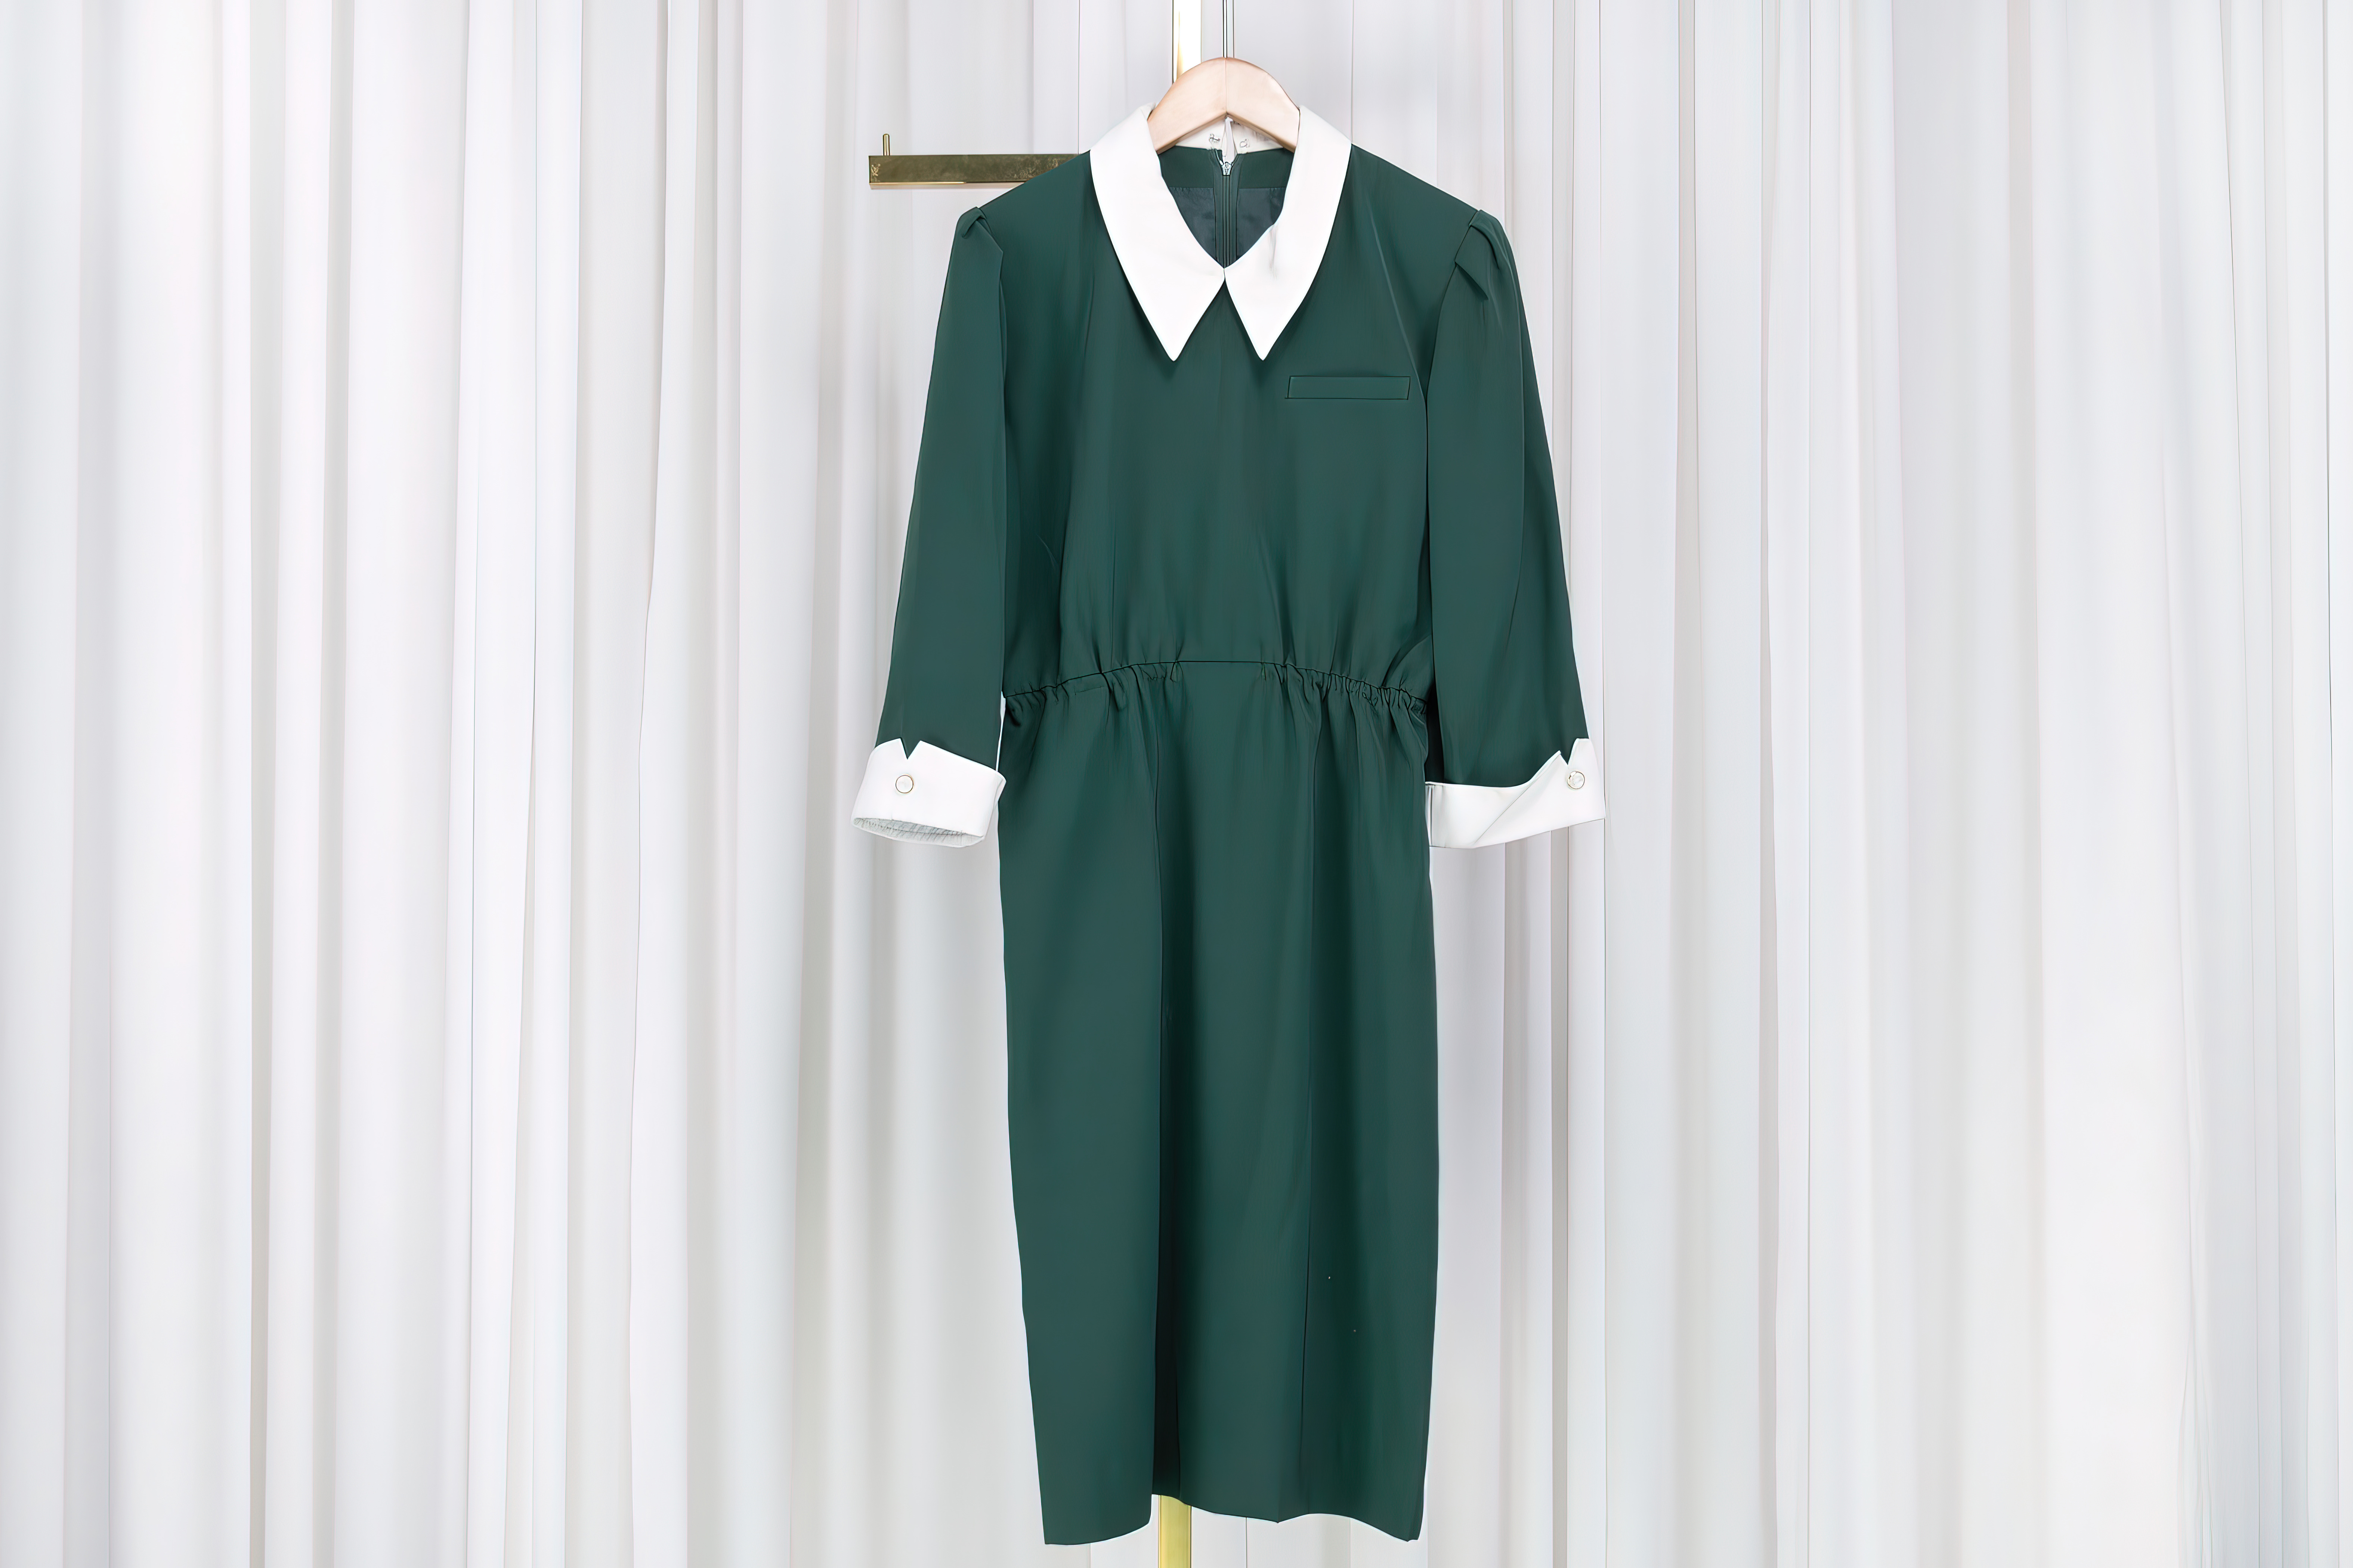 A green dress is hanging from a coat hanger in front of a white curtain